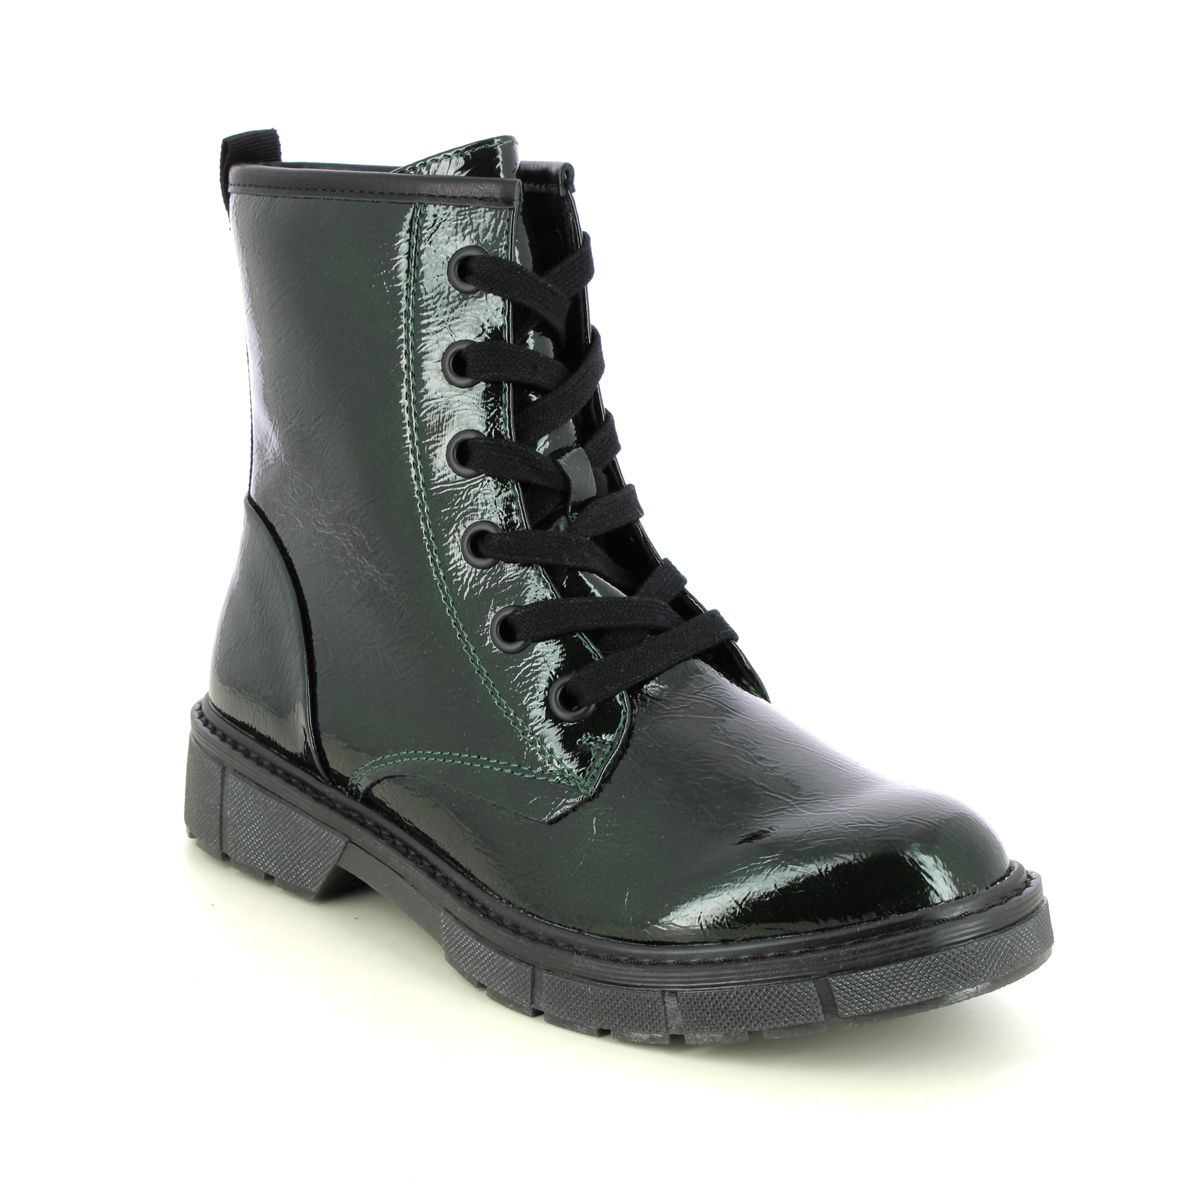 Marco Tozzi Badie  Lace Green Patent Womens Biker Boots 25282-41-789 In Size 37 In Plain Green Patent